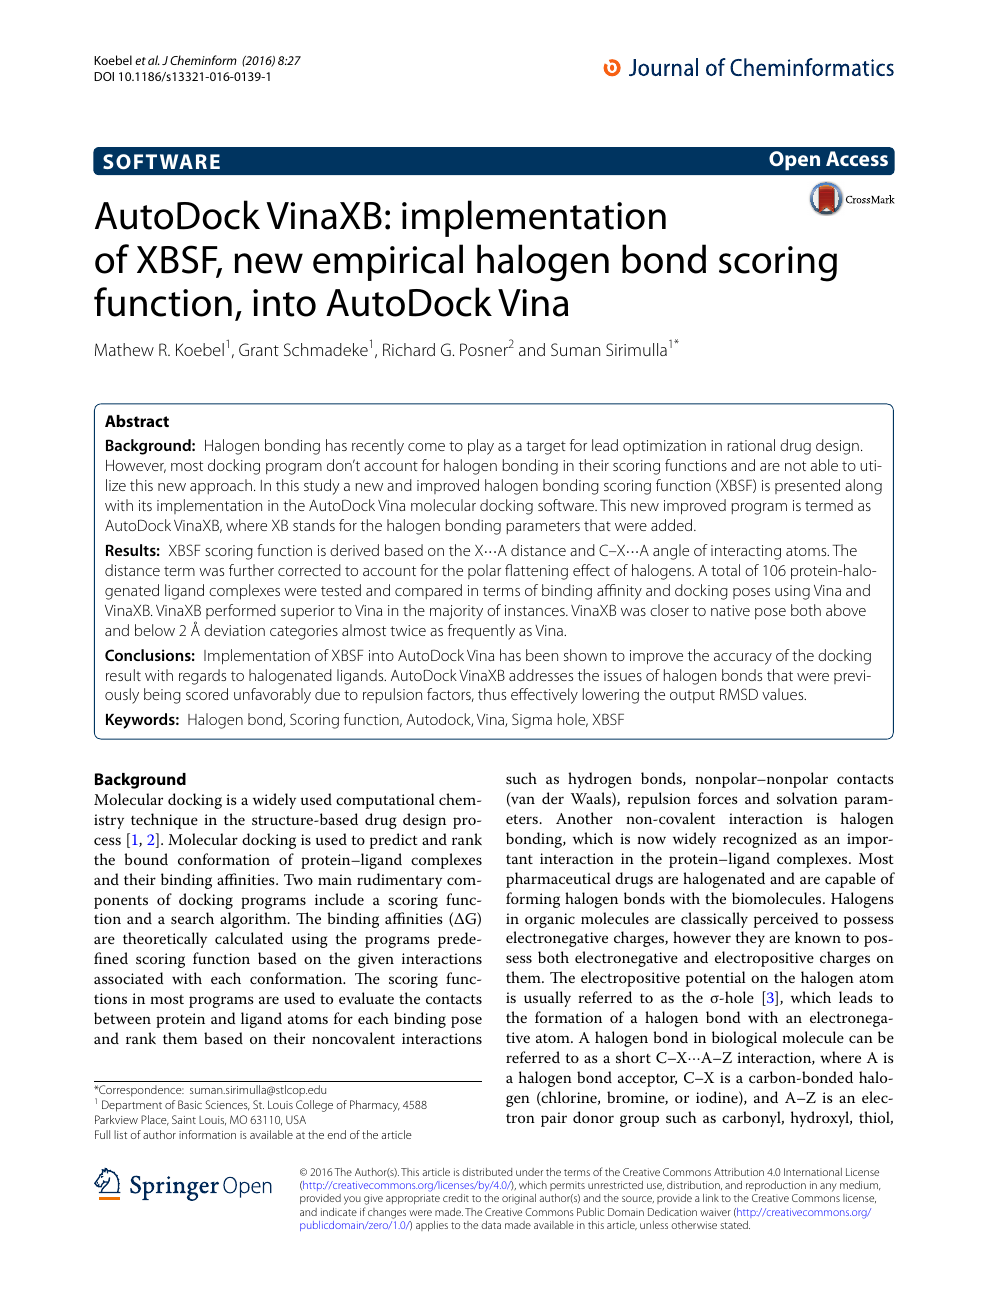 Autodock Vinaxb Implementation Of Xbsf New Empirical Halogen Bond Scoring Function Into Autodock Vina Topic Of Research Paper In Biological Sciences Download Scholarly Article Pdf And Read For Free On Cyberleninka